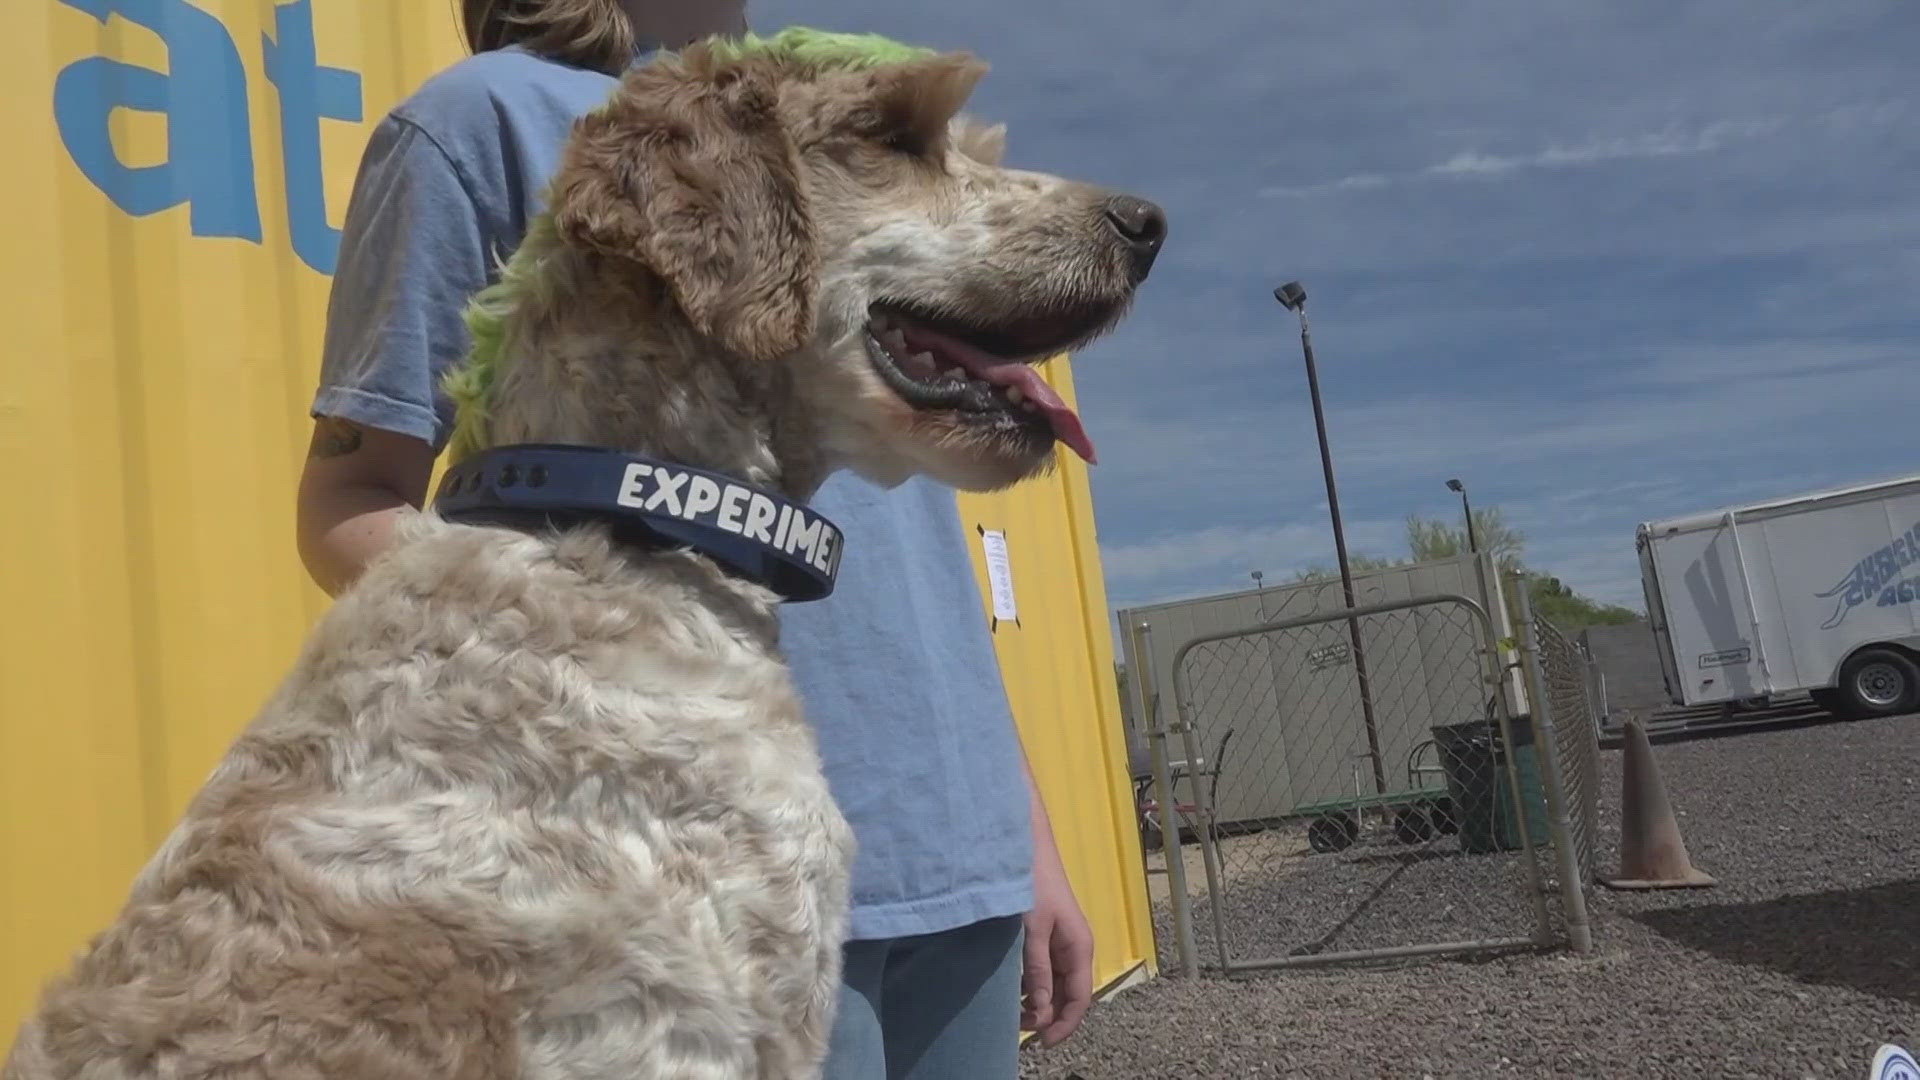 The American Kennel Club is now offering fetch certifications for dogs in the Valley.